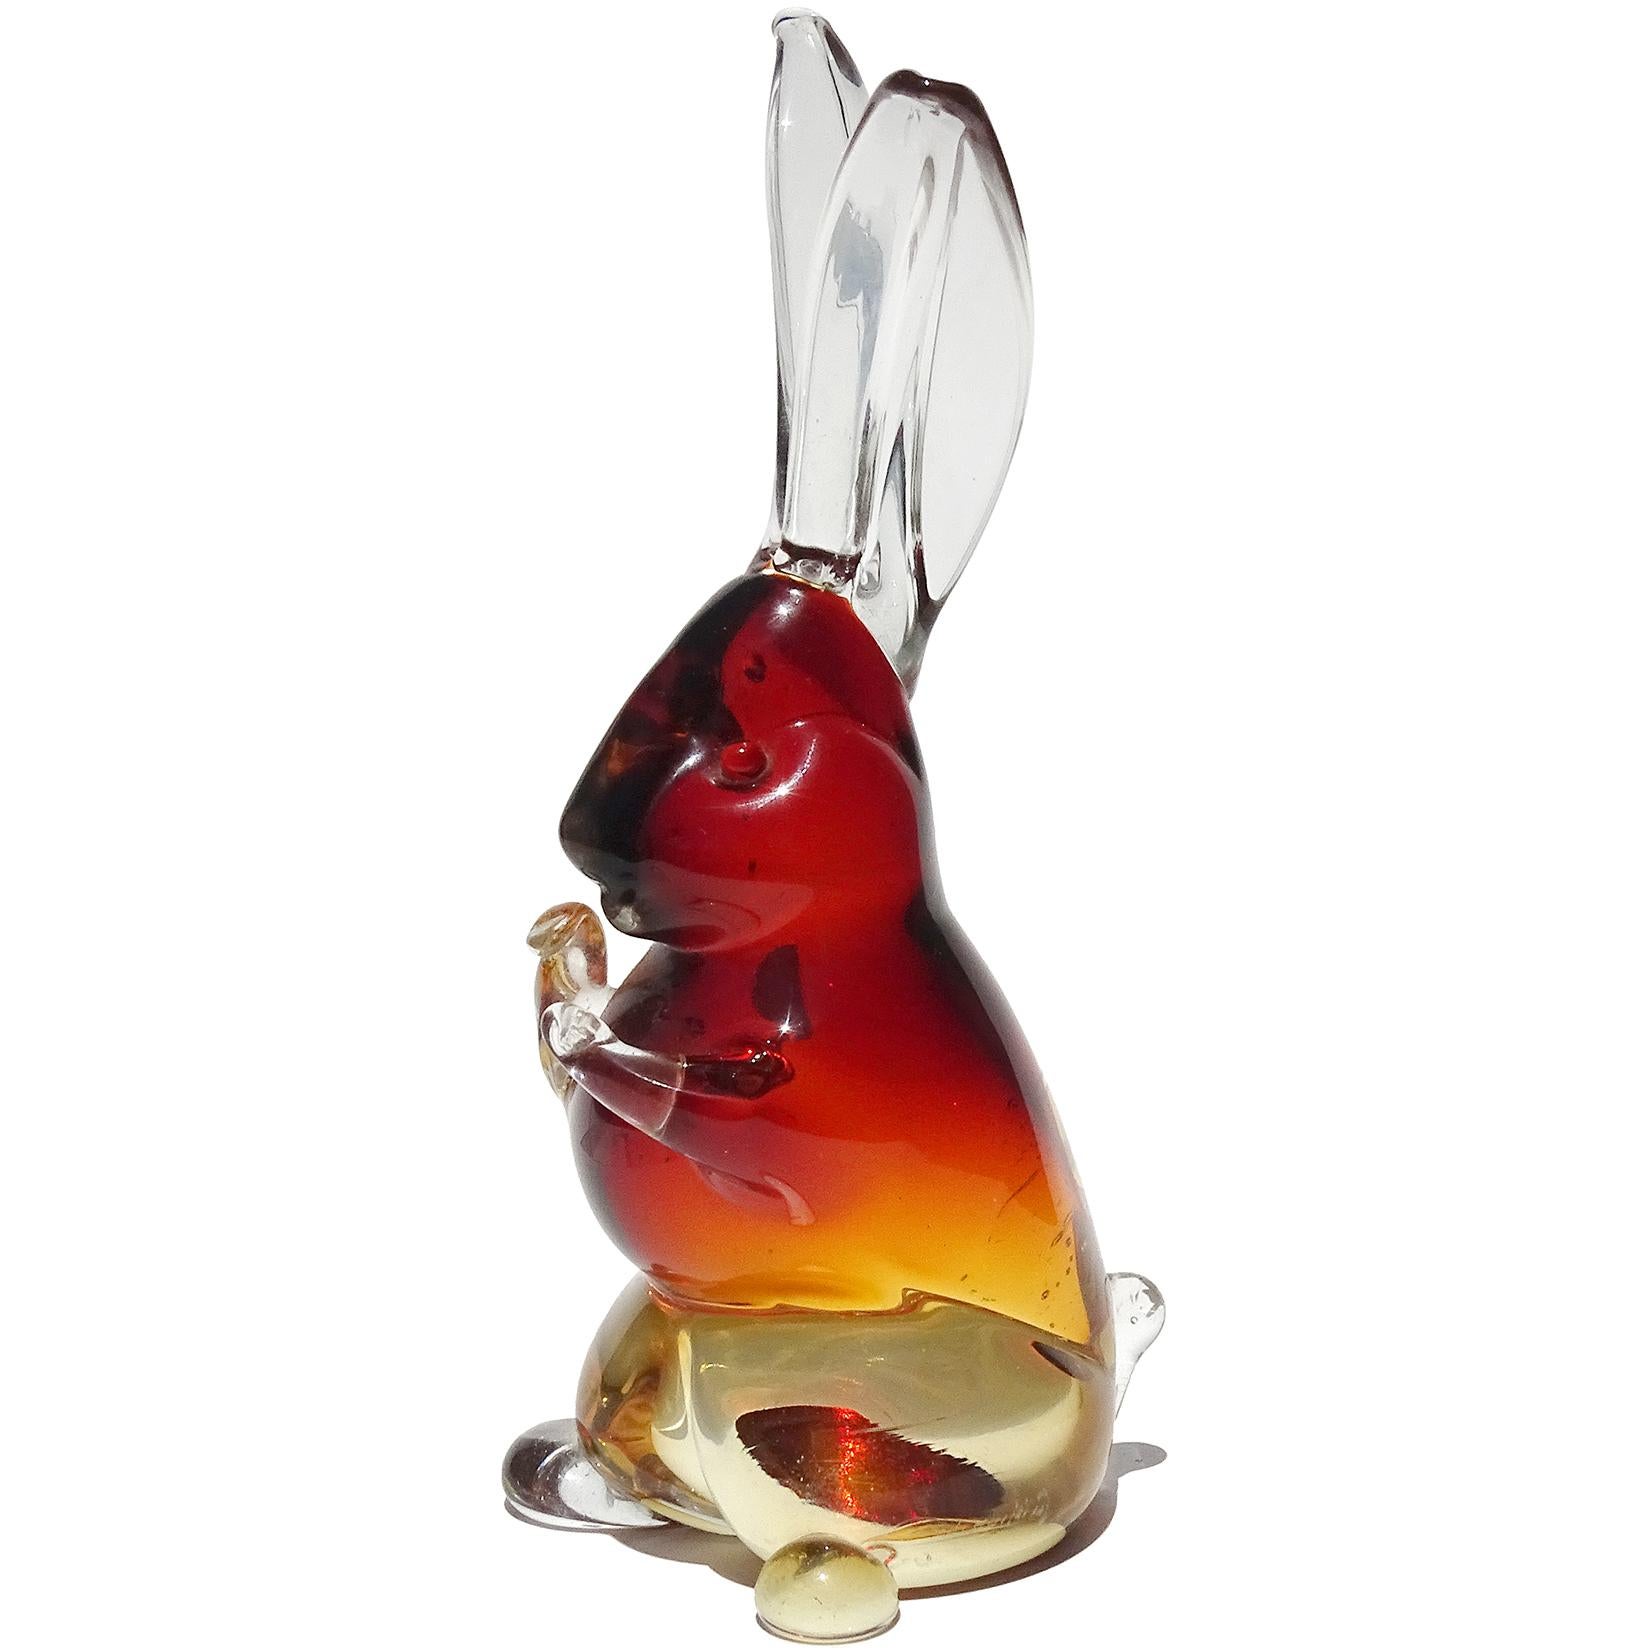 Beautiful and very cute Murano hand blown Sommerso red, orange to clear Italian art glass bunny rabbit sculpture / figurine. Documented to the Cenedese company. Would make a great display piece on any desk, curio cabinet or coffee table. Mid-century